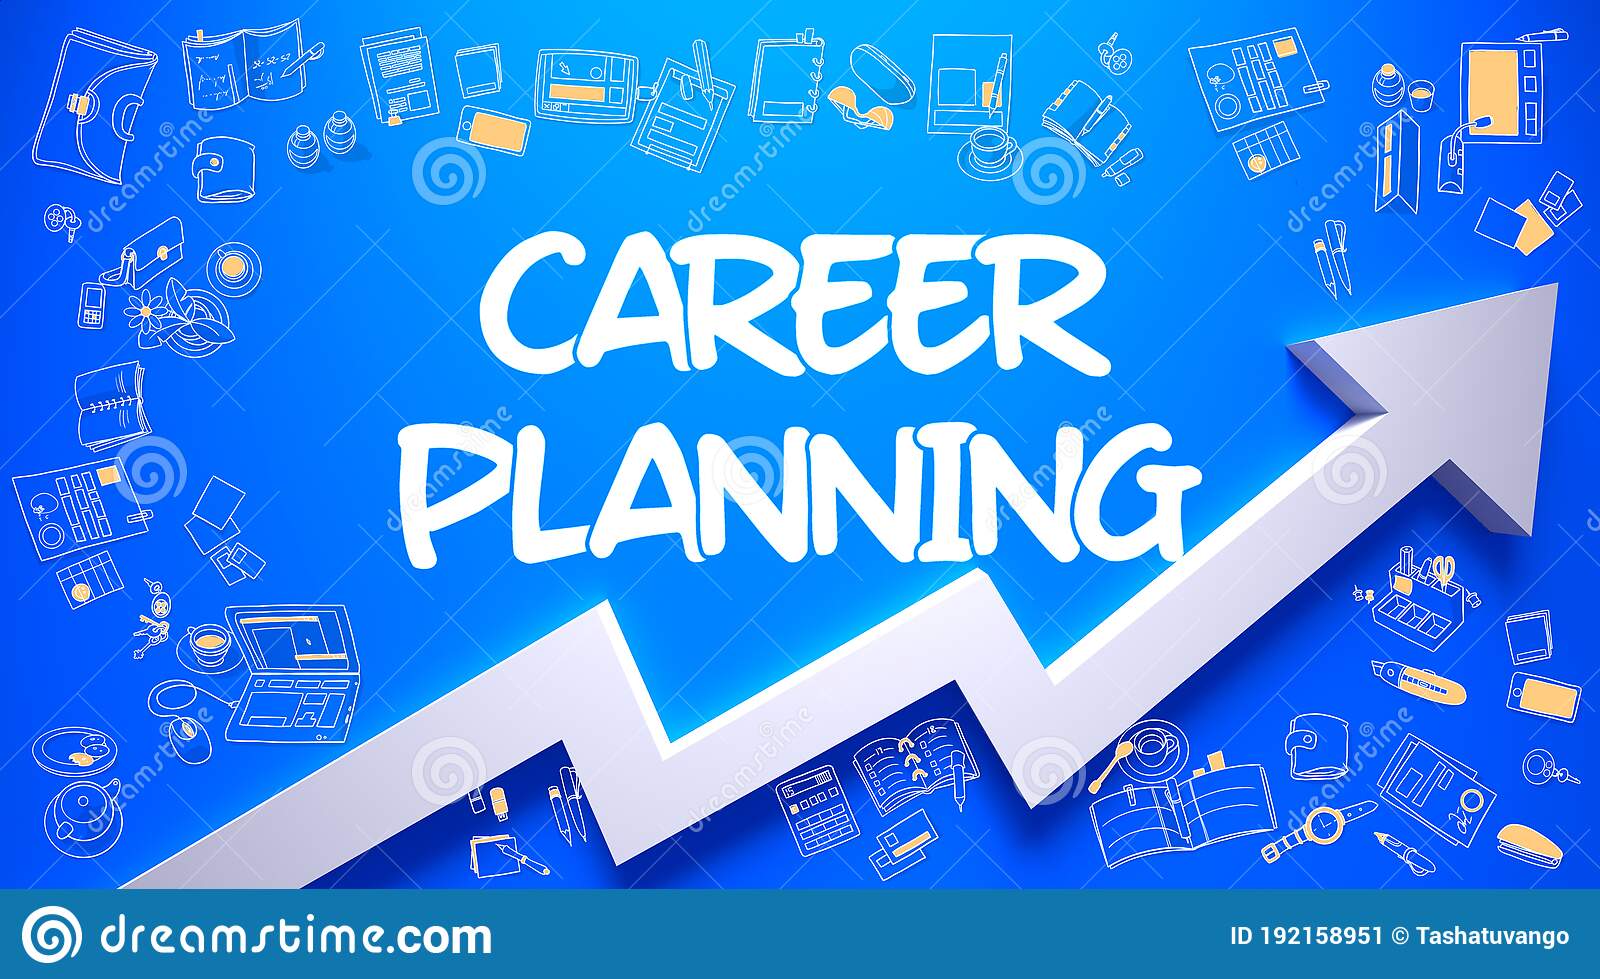 Career Planning 101: Self-Discovery for Teens & Twenty-Somethings with Annette Bosley-Boyce